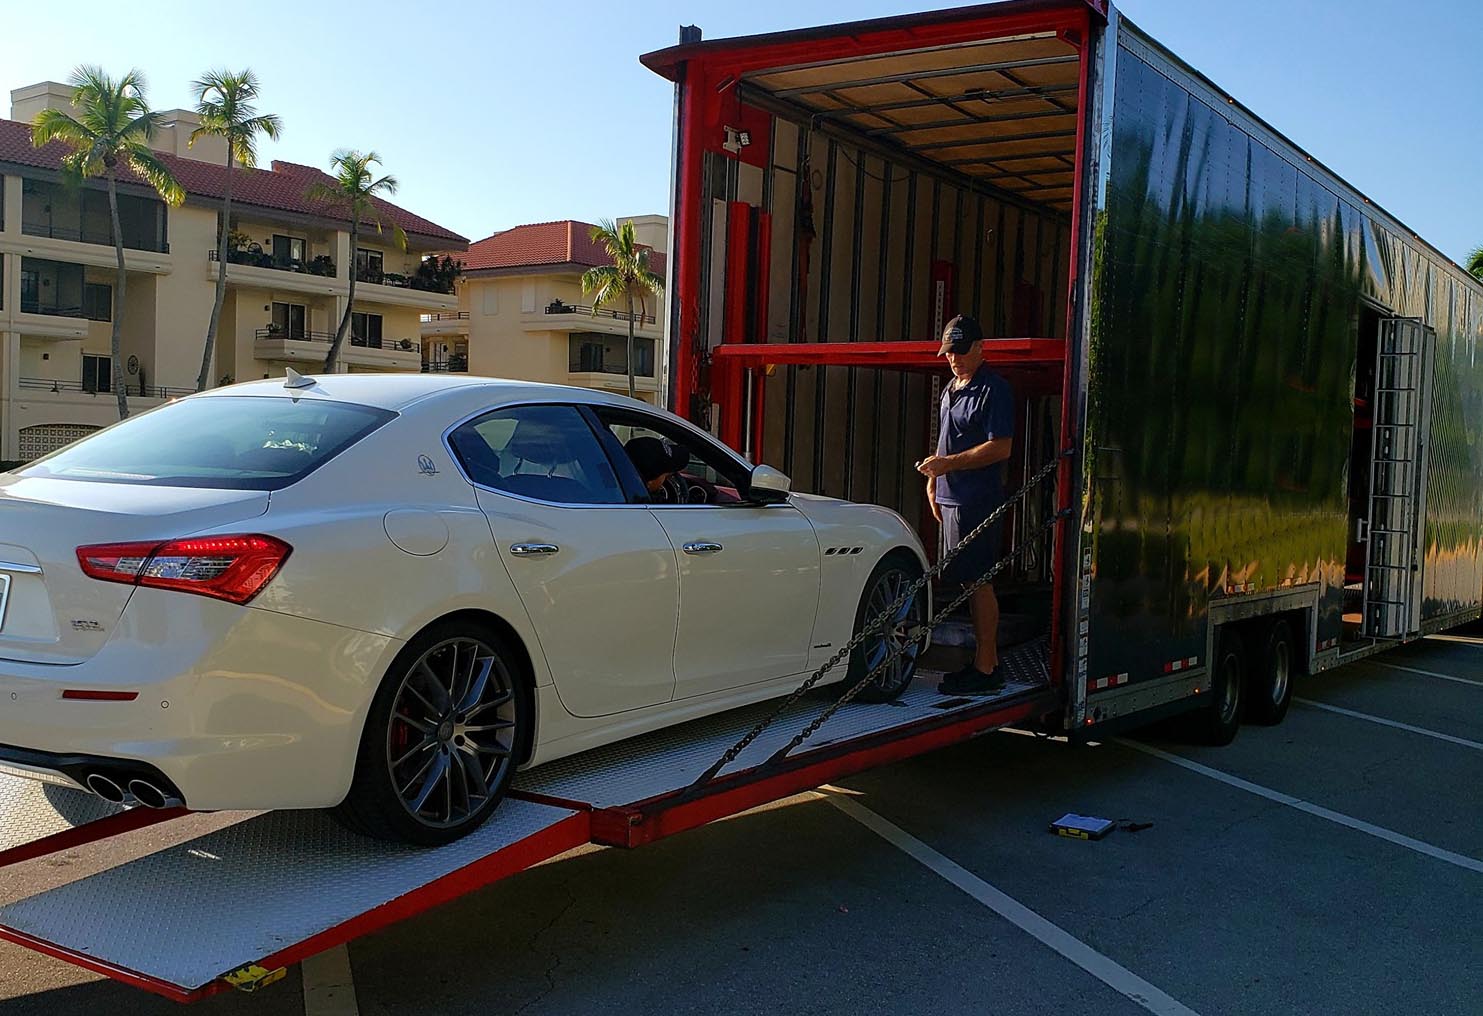 Types of Companies Offering Car Shipping Services